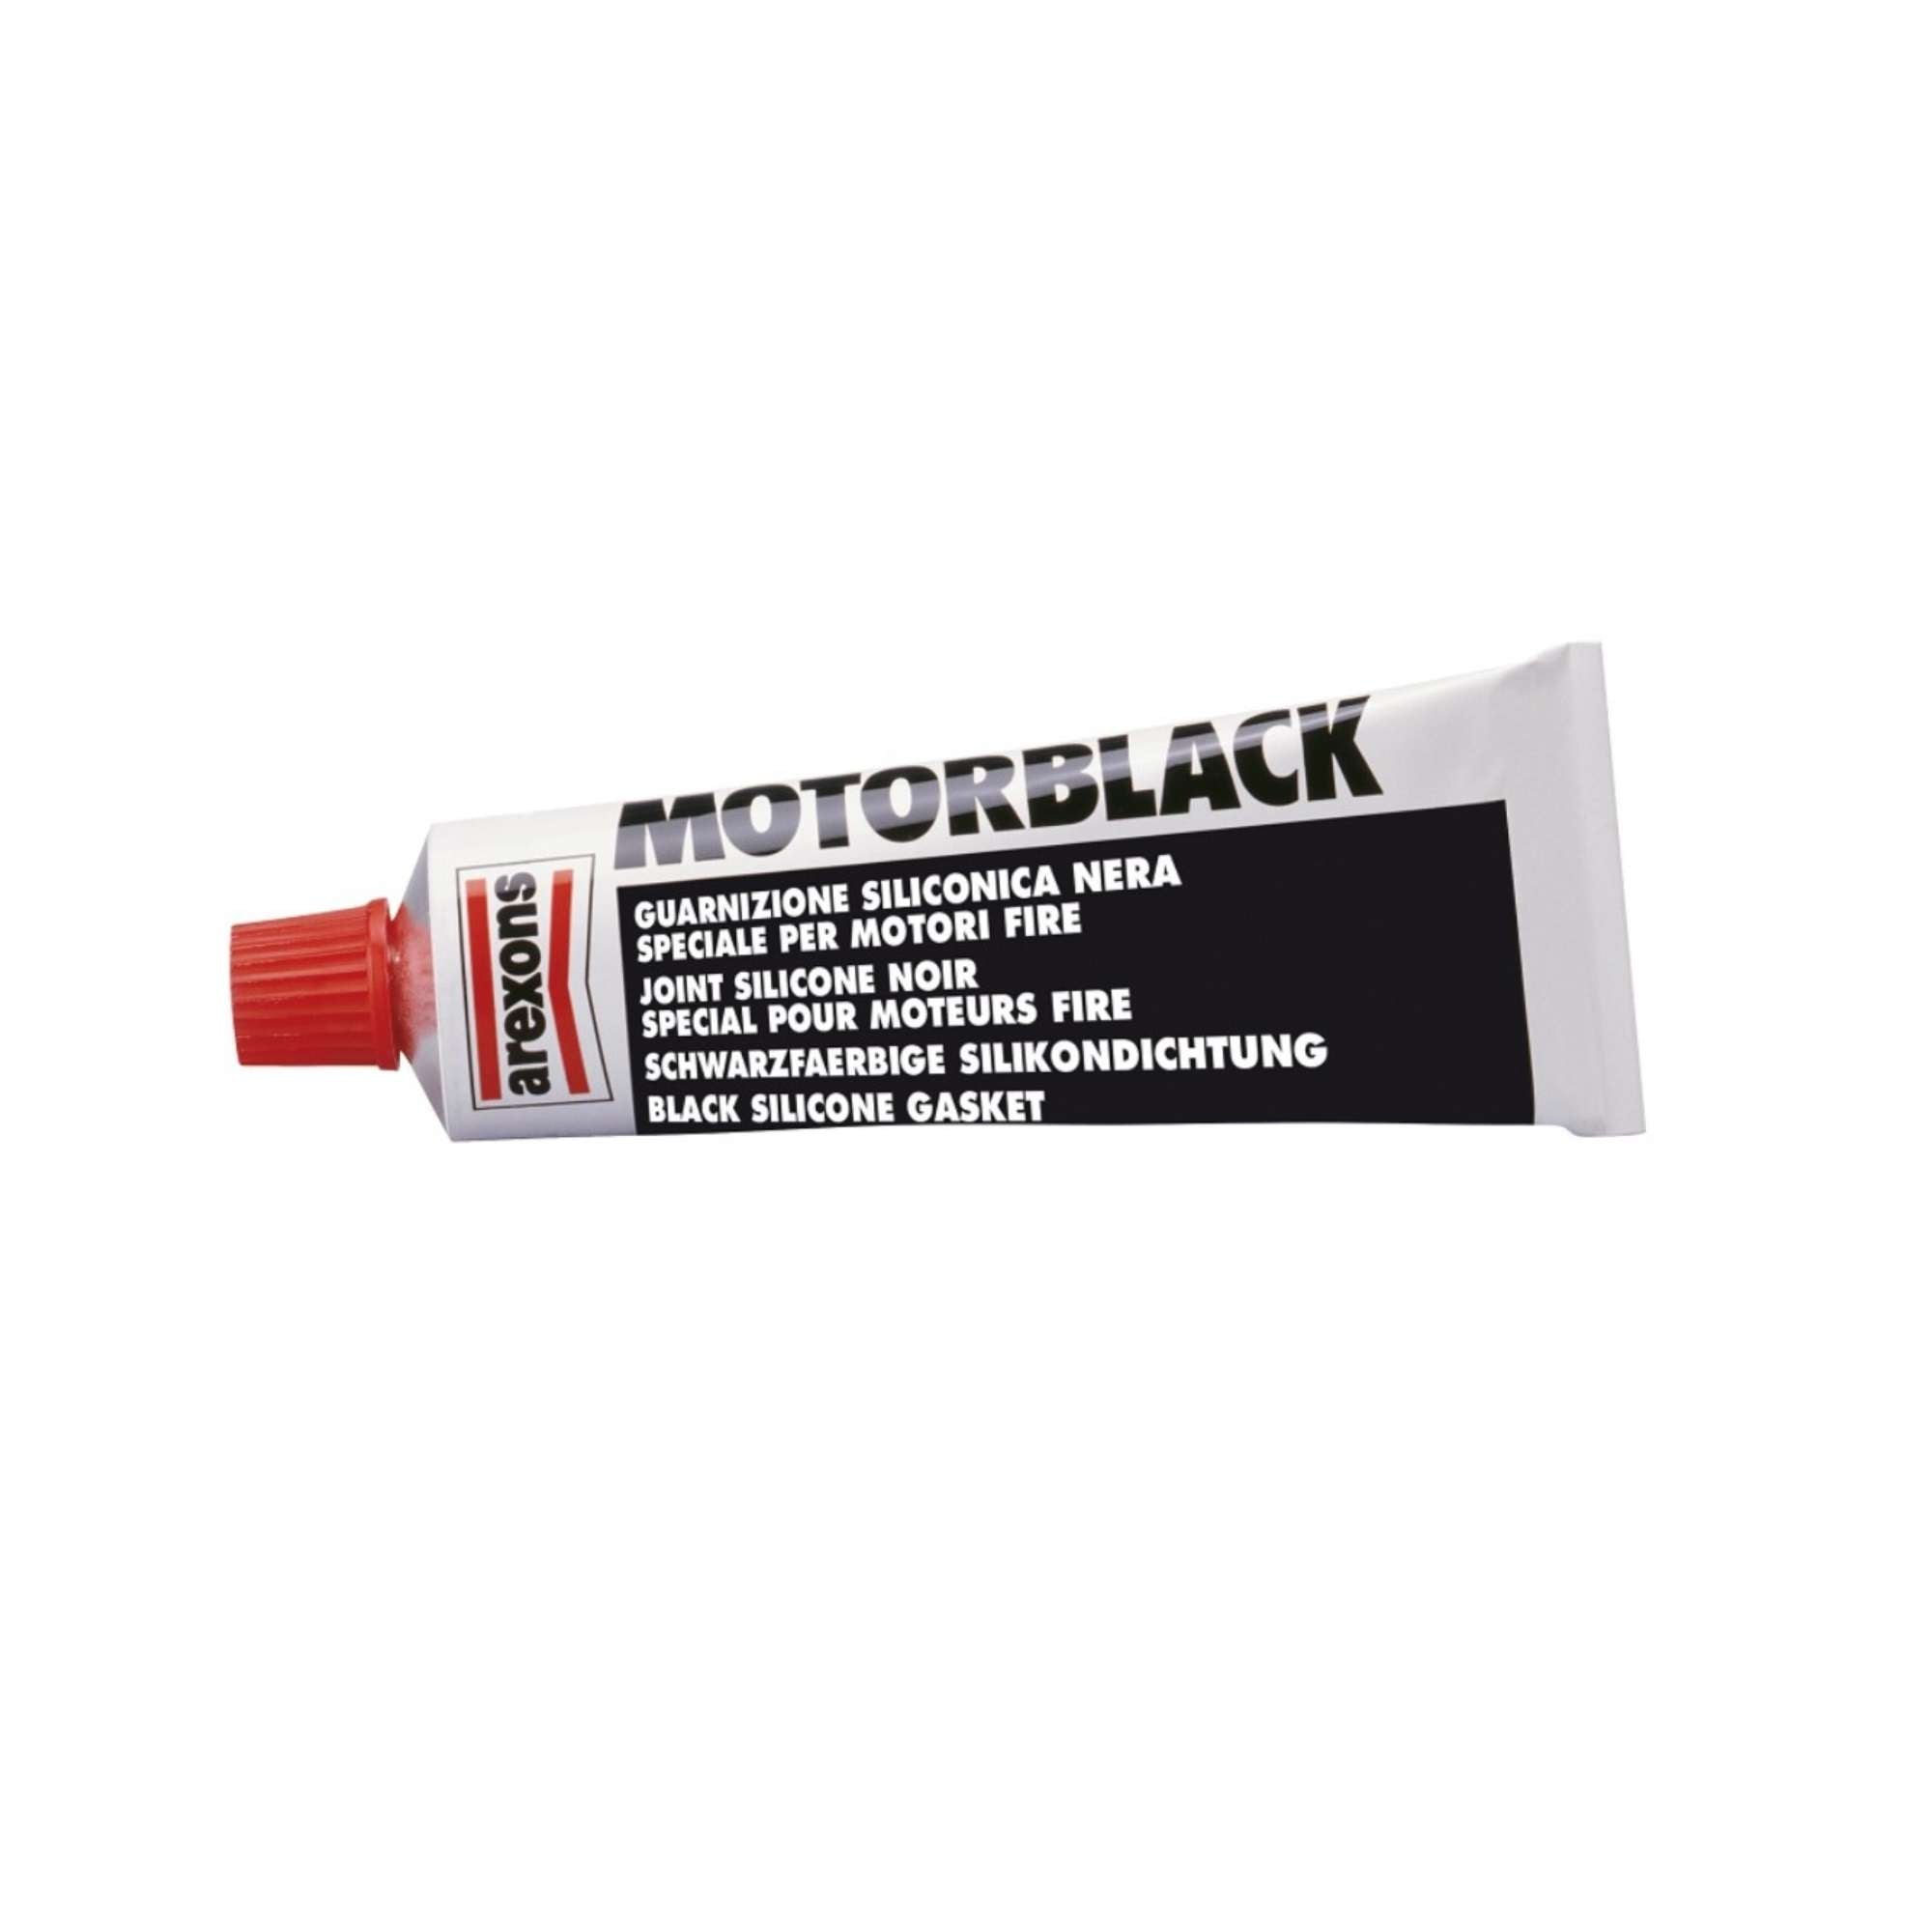 Motorblack special black silicone gasket for fire engines - Arexons 0094